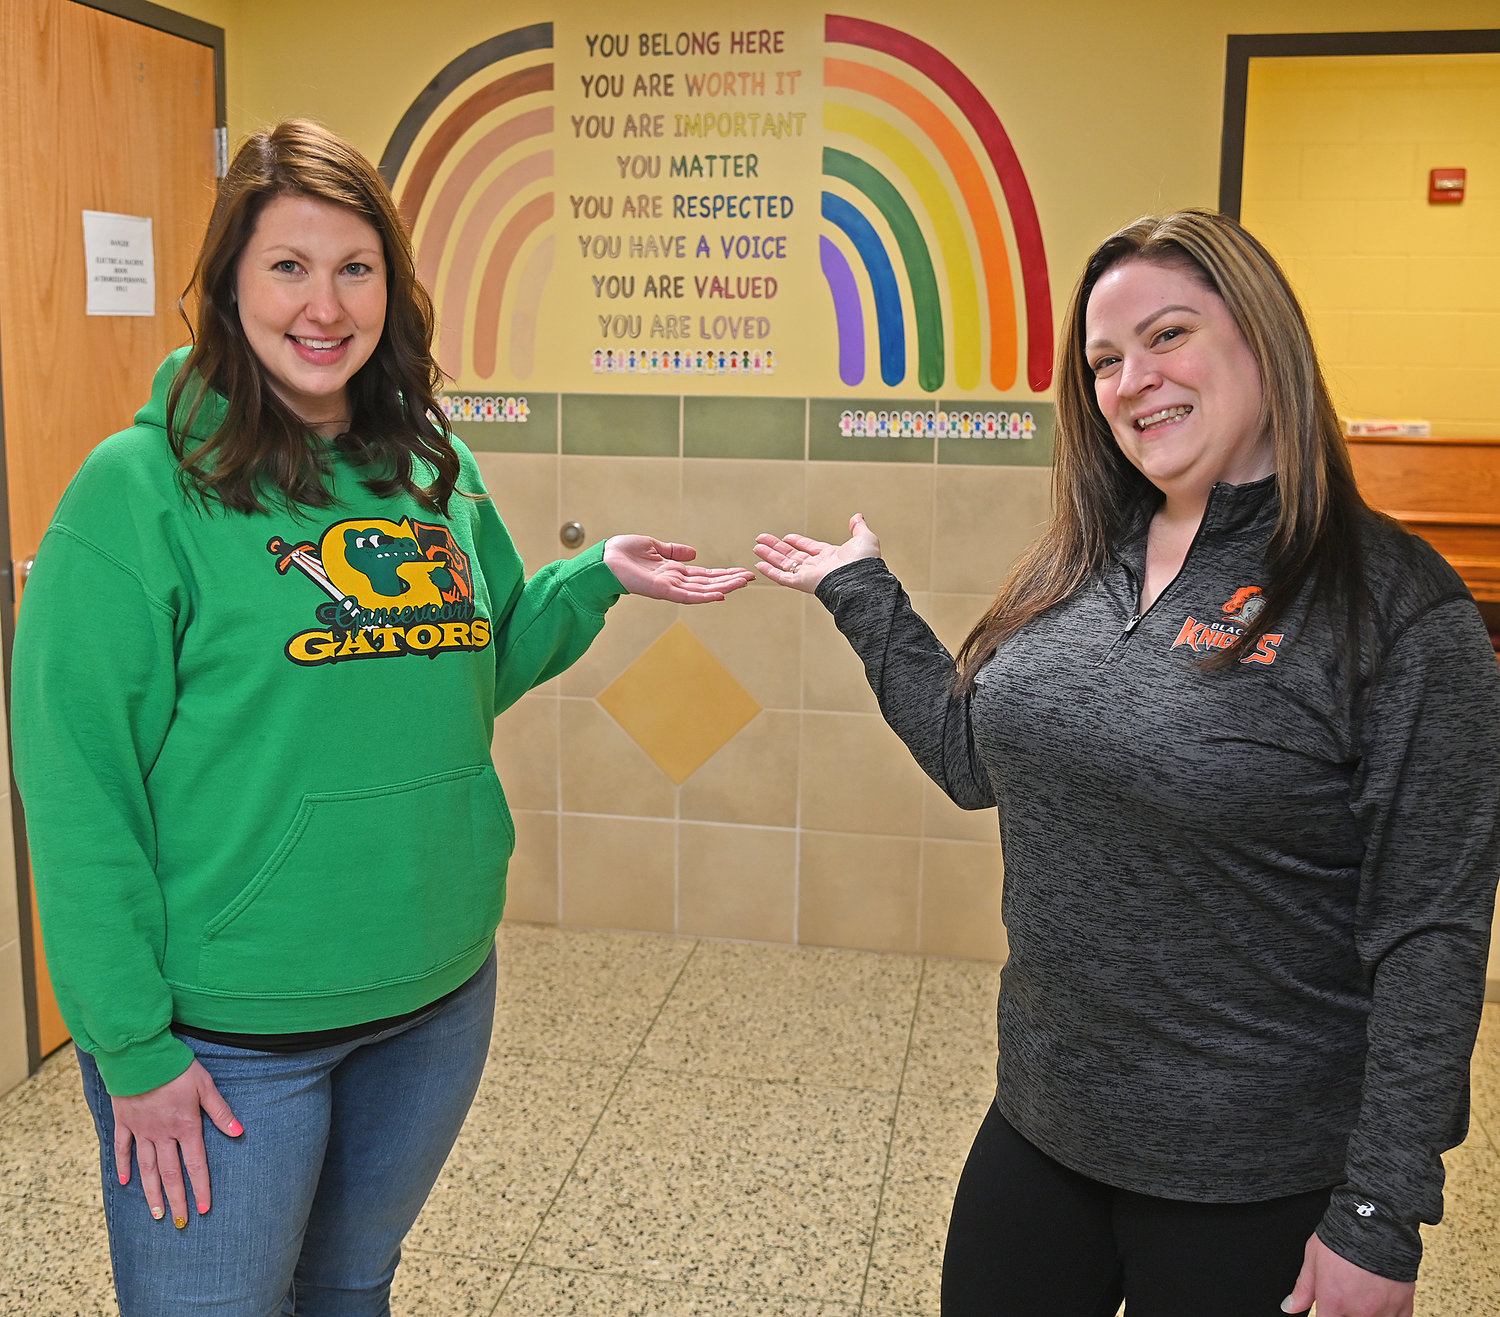 Rome City School District Director of Counseling Services Amanda Jones and Counselor Melinda McCabe pose Thursday, Feb. 9 at Gansevoort Elementary School in Rome.